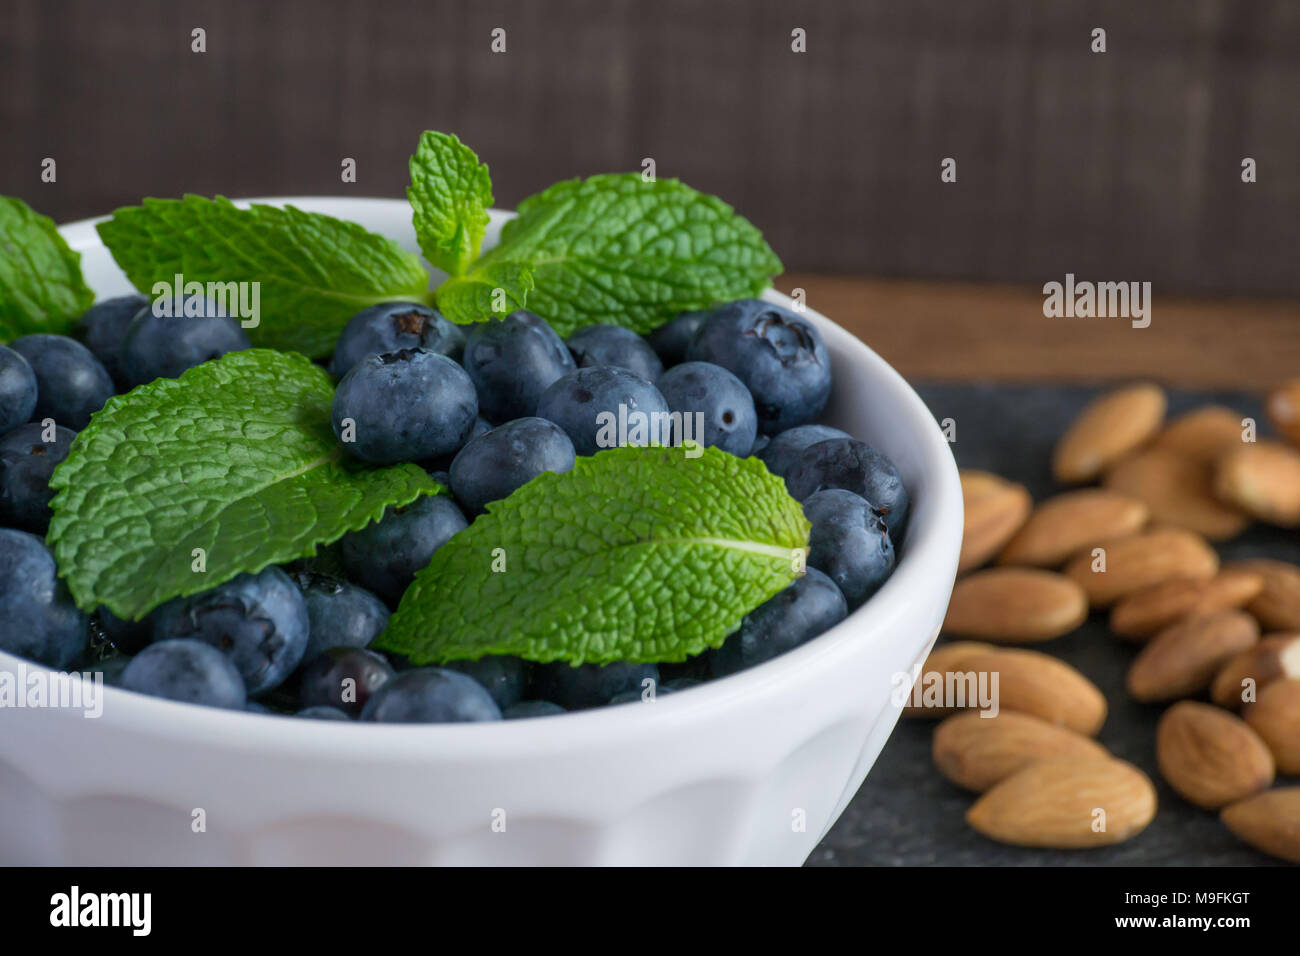 Ready for Summer Fruit? Raw, sweet blueberries in a white bowl look beautiful and taste even better. Lemon and mint add a bright contrast of color. Stock Photo